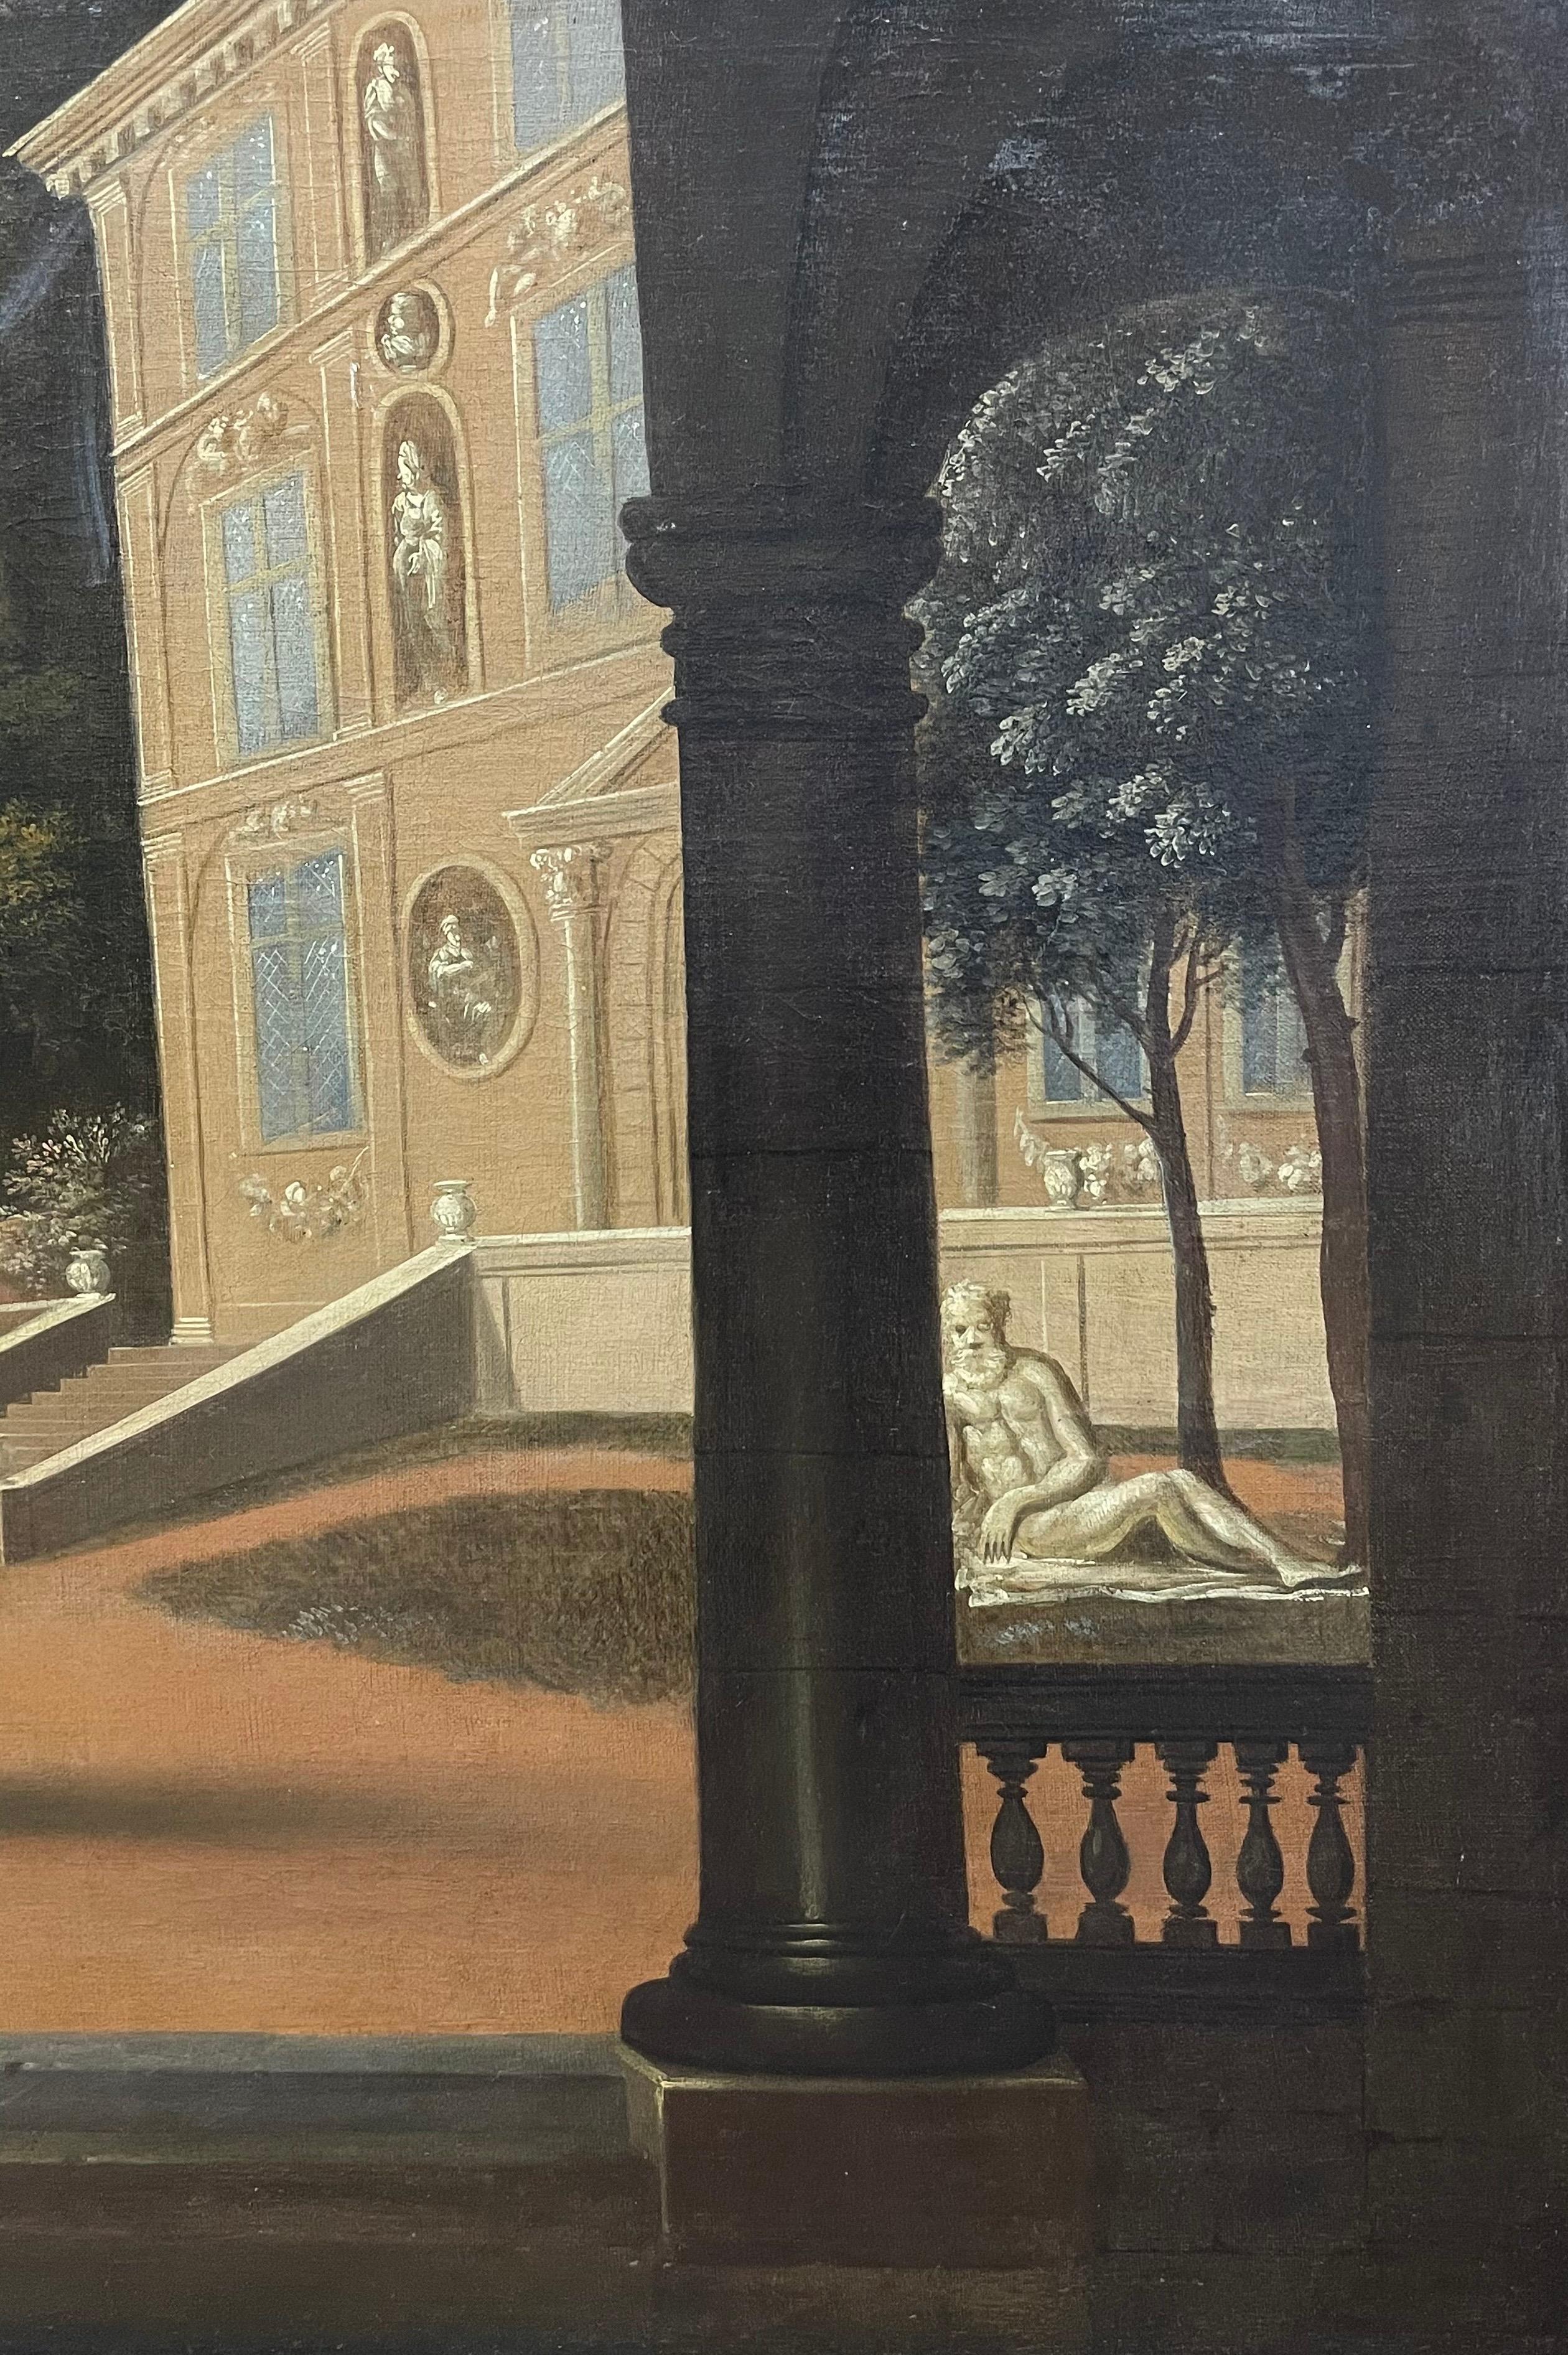 Neo-Classical Arcadian Landscape
Italian School, early 1700's
oil painting on canvas, framed
canvas: 32 x 58 inches
framed: 42 x 67.5 inches x 2.5 inches deep
provenance: formerly with Christies London (see auction stencil marks to the